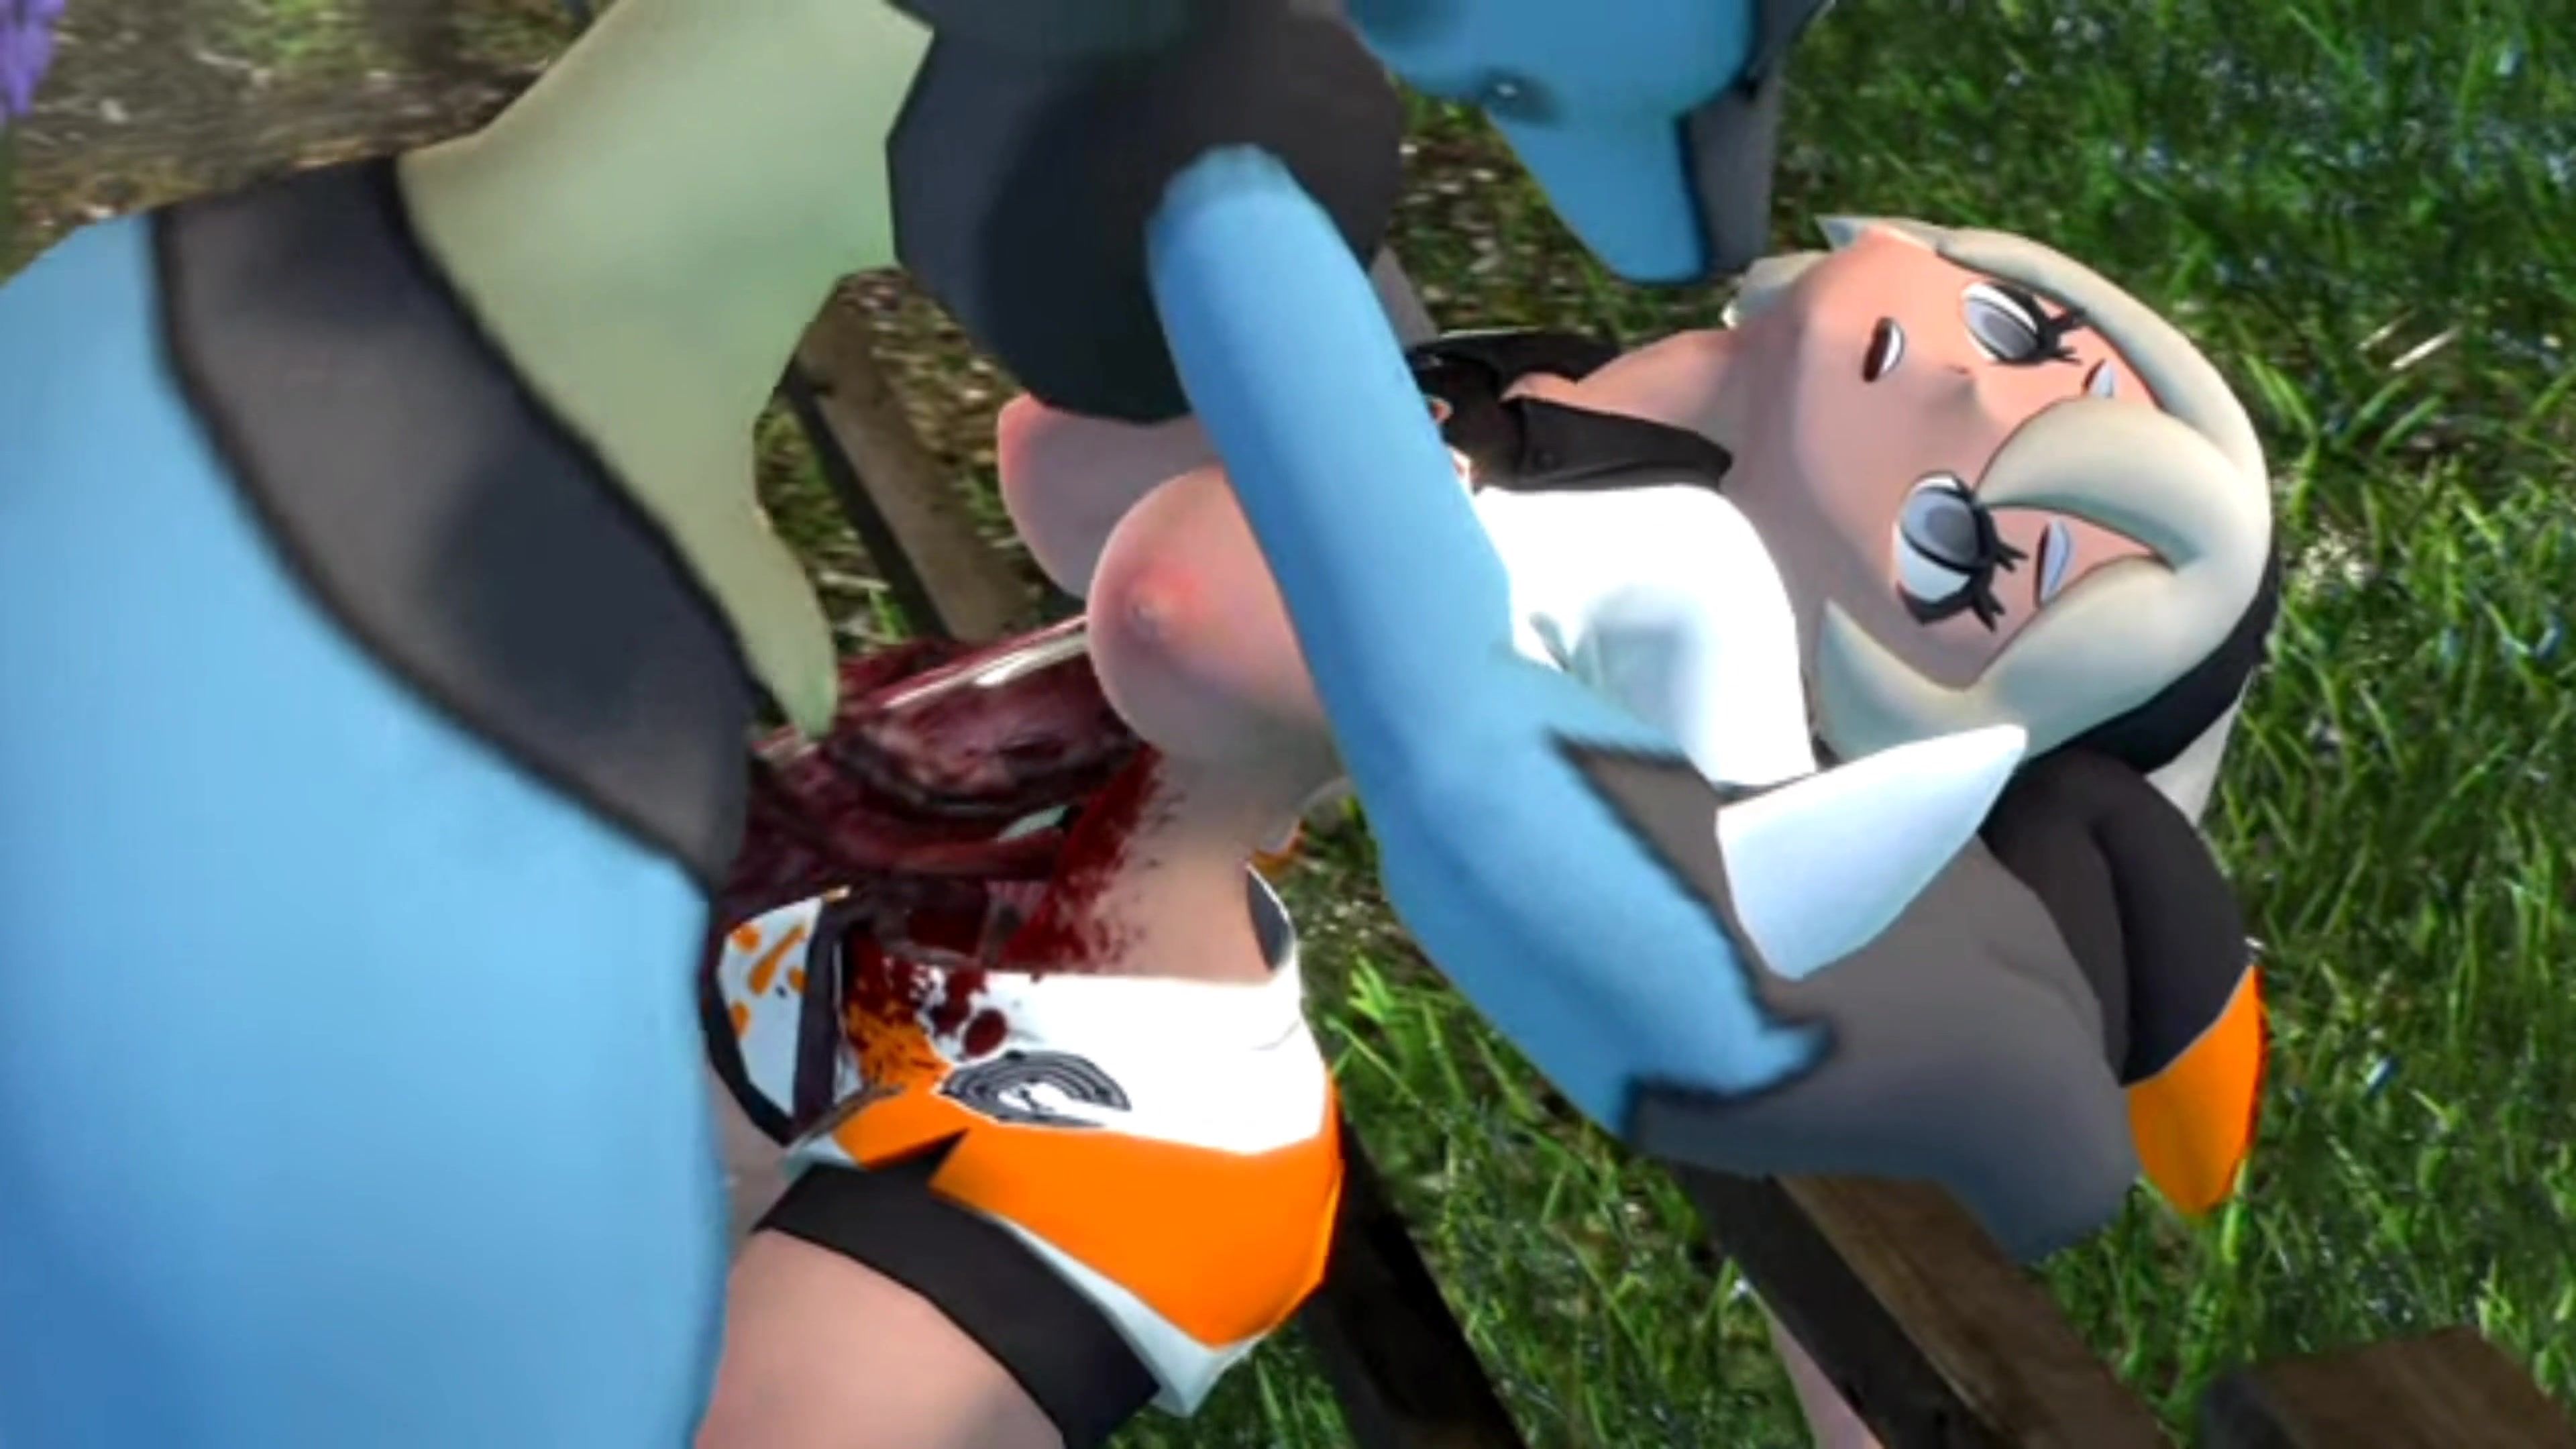 Pokemon Gore Porn - This feels better than your pussy! - 3D Hentai Porn